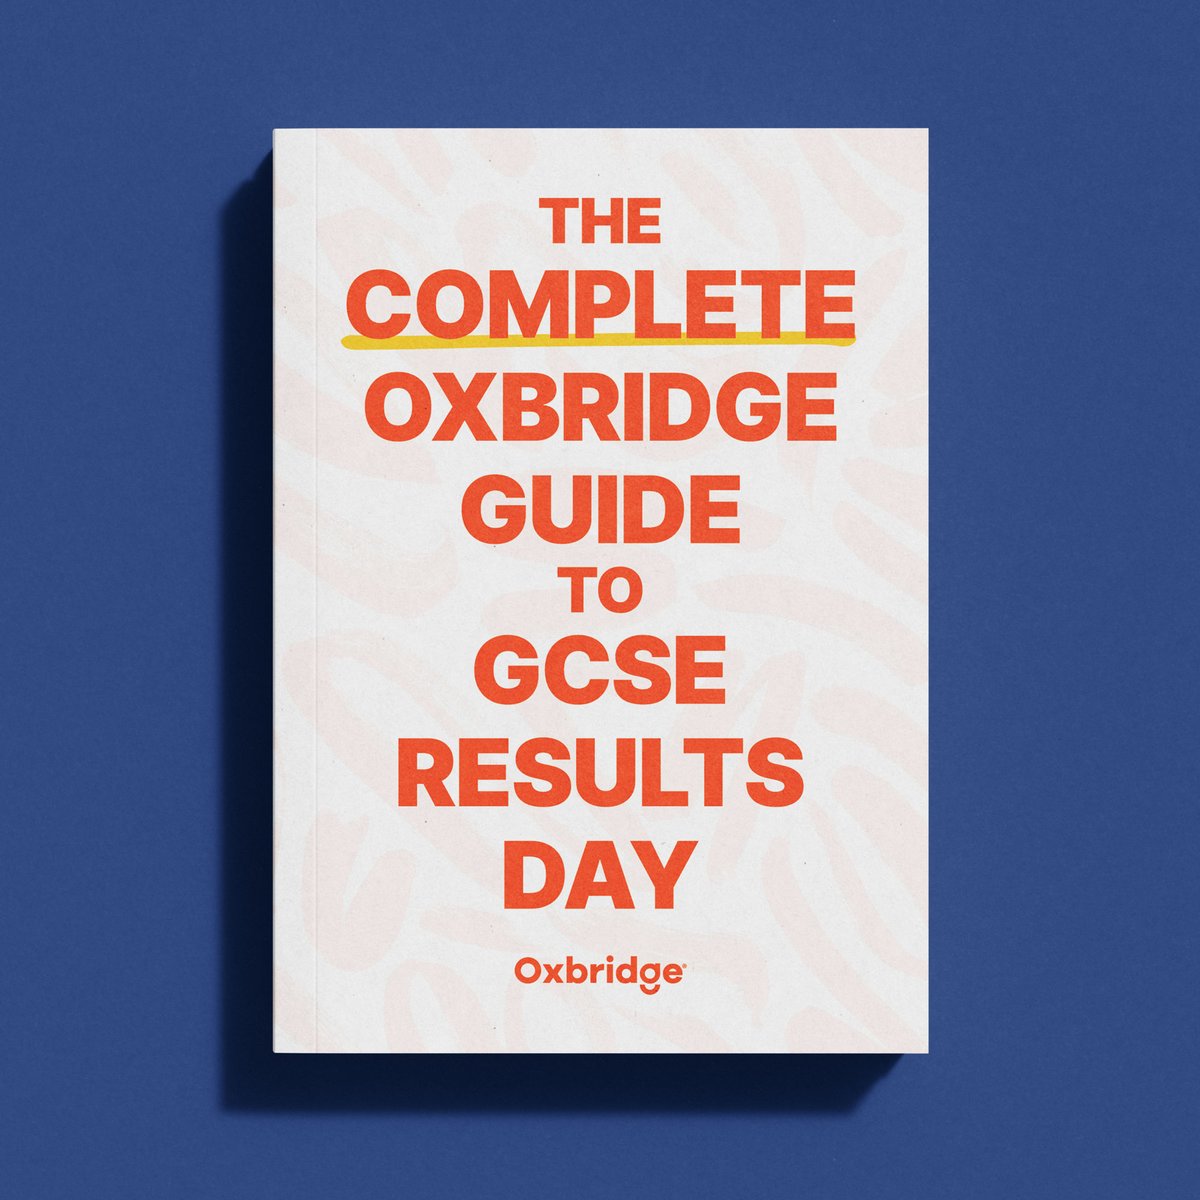 If you're worried about getting your results this week, we hear you. Check out our guide to #GCSEResultsDay to help you prepare, from knowing when the results come out to making sure you know what to bring 👉 oxbridgehomelearning.uk/blog/gcse-resu… 👈 #students #exams